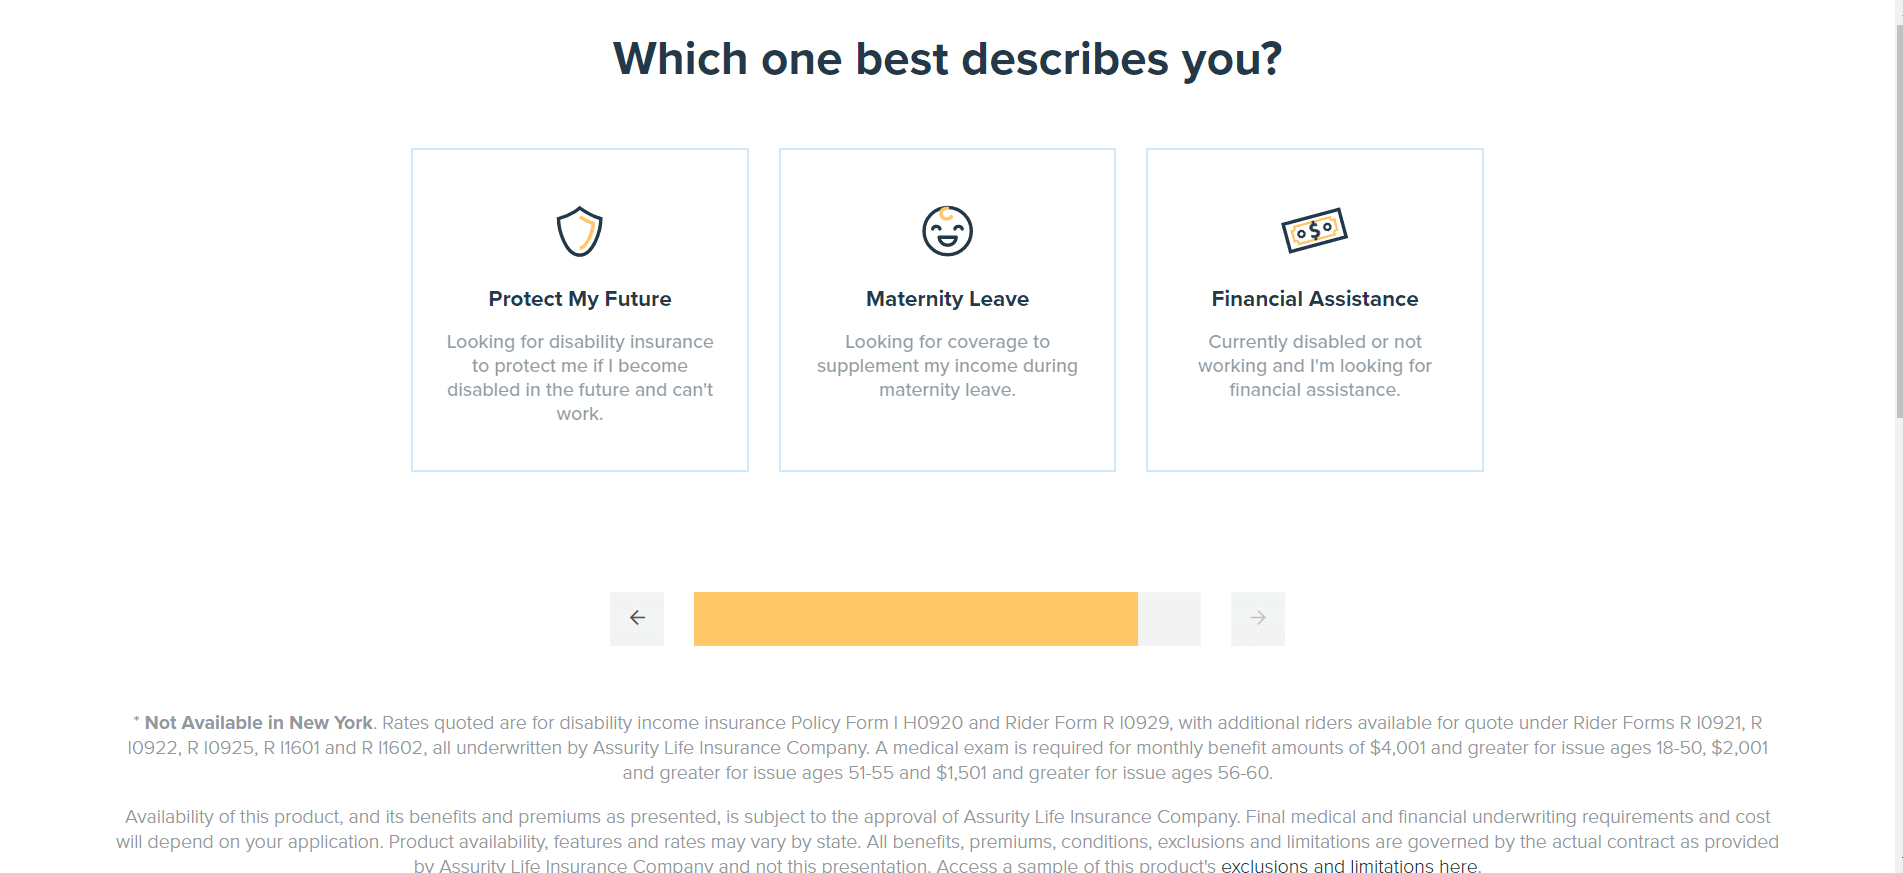 Breeze Review - Which describes you?